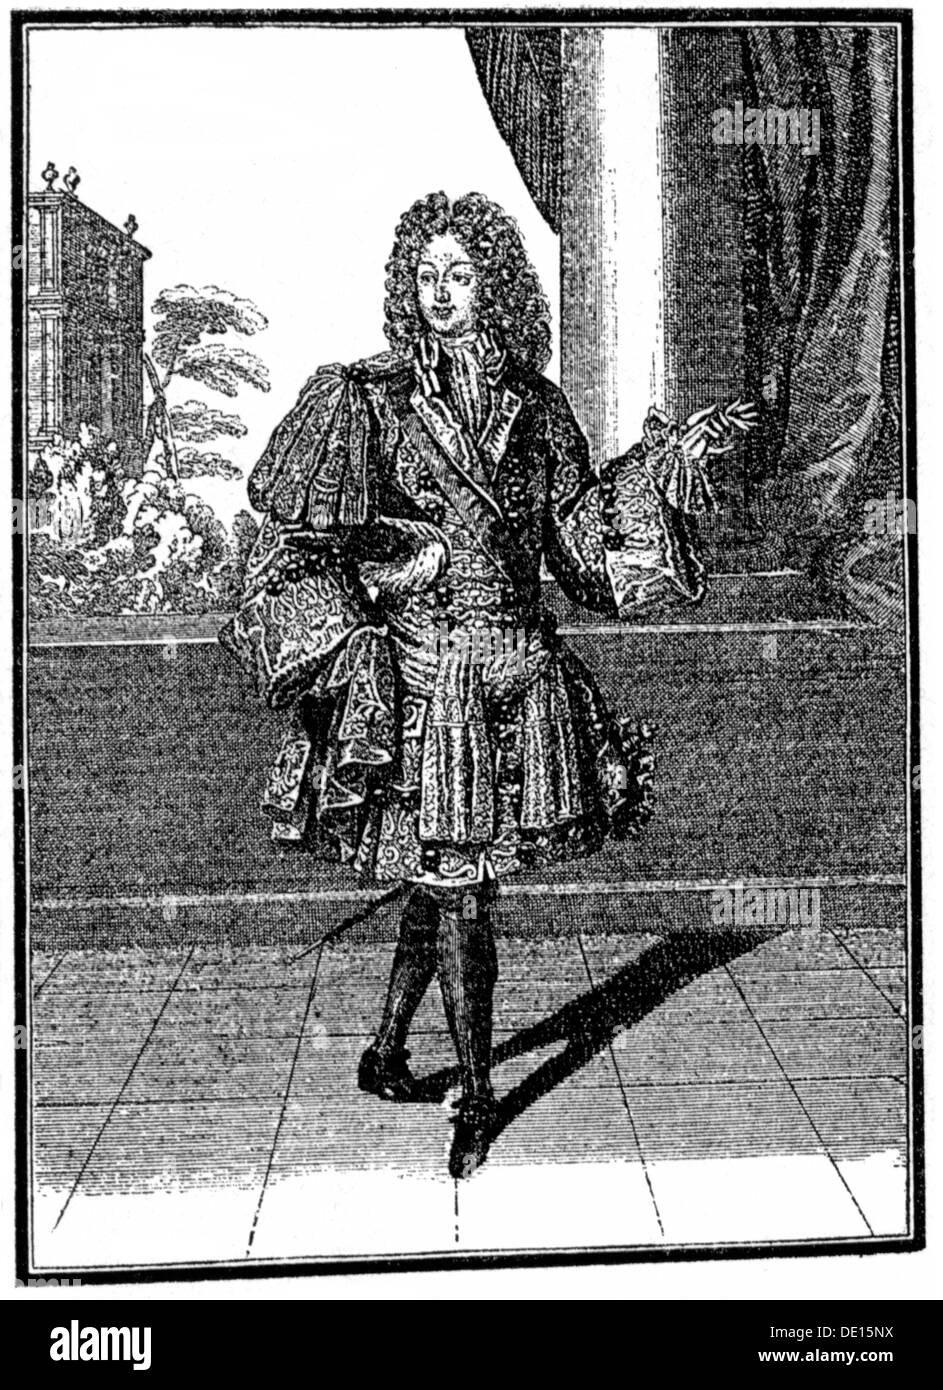 fashion, 17th century, Royal prince in court dress, copper engraving, France, second half 17th century, 17th century, graphic, graphics, baroque, aristocracy, aristocracies, noble, noble man, nobles, noble men, prince, princes, clothes, outfit, outfits, men's fashion, full length, standing, periwig, periwigs, wigs, full-bottomed wig, nobleman, noblemen, aristocrat, aristocrats, historic, historical, man, men, male, people, Artist's Copyright has not to be cleared Stock Photo